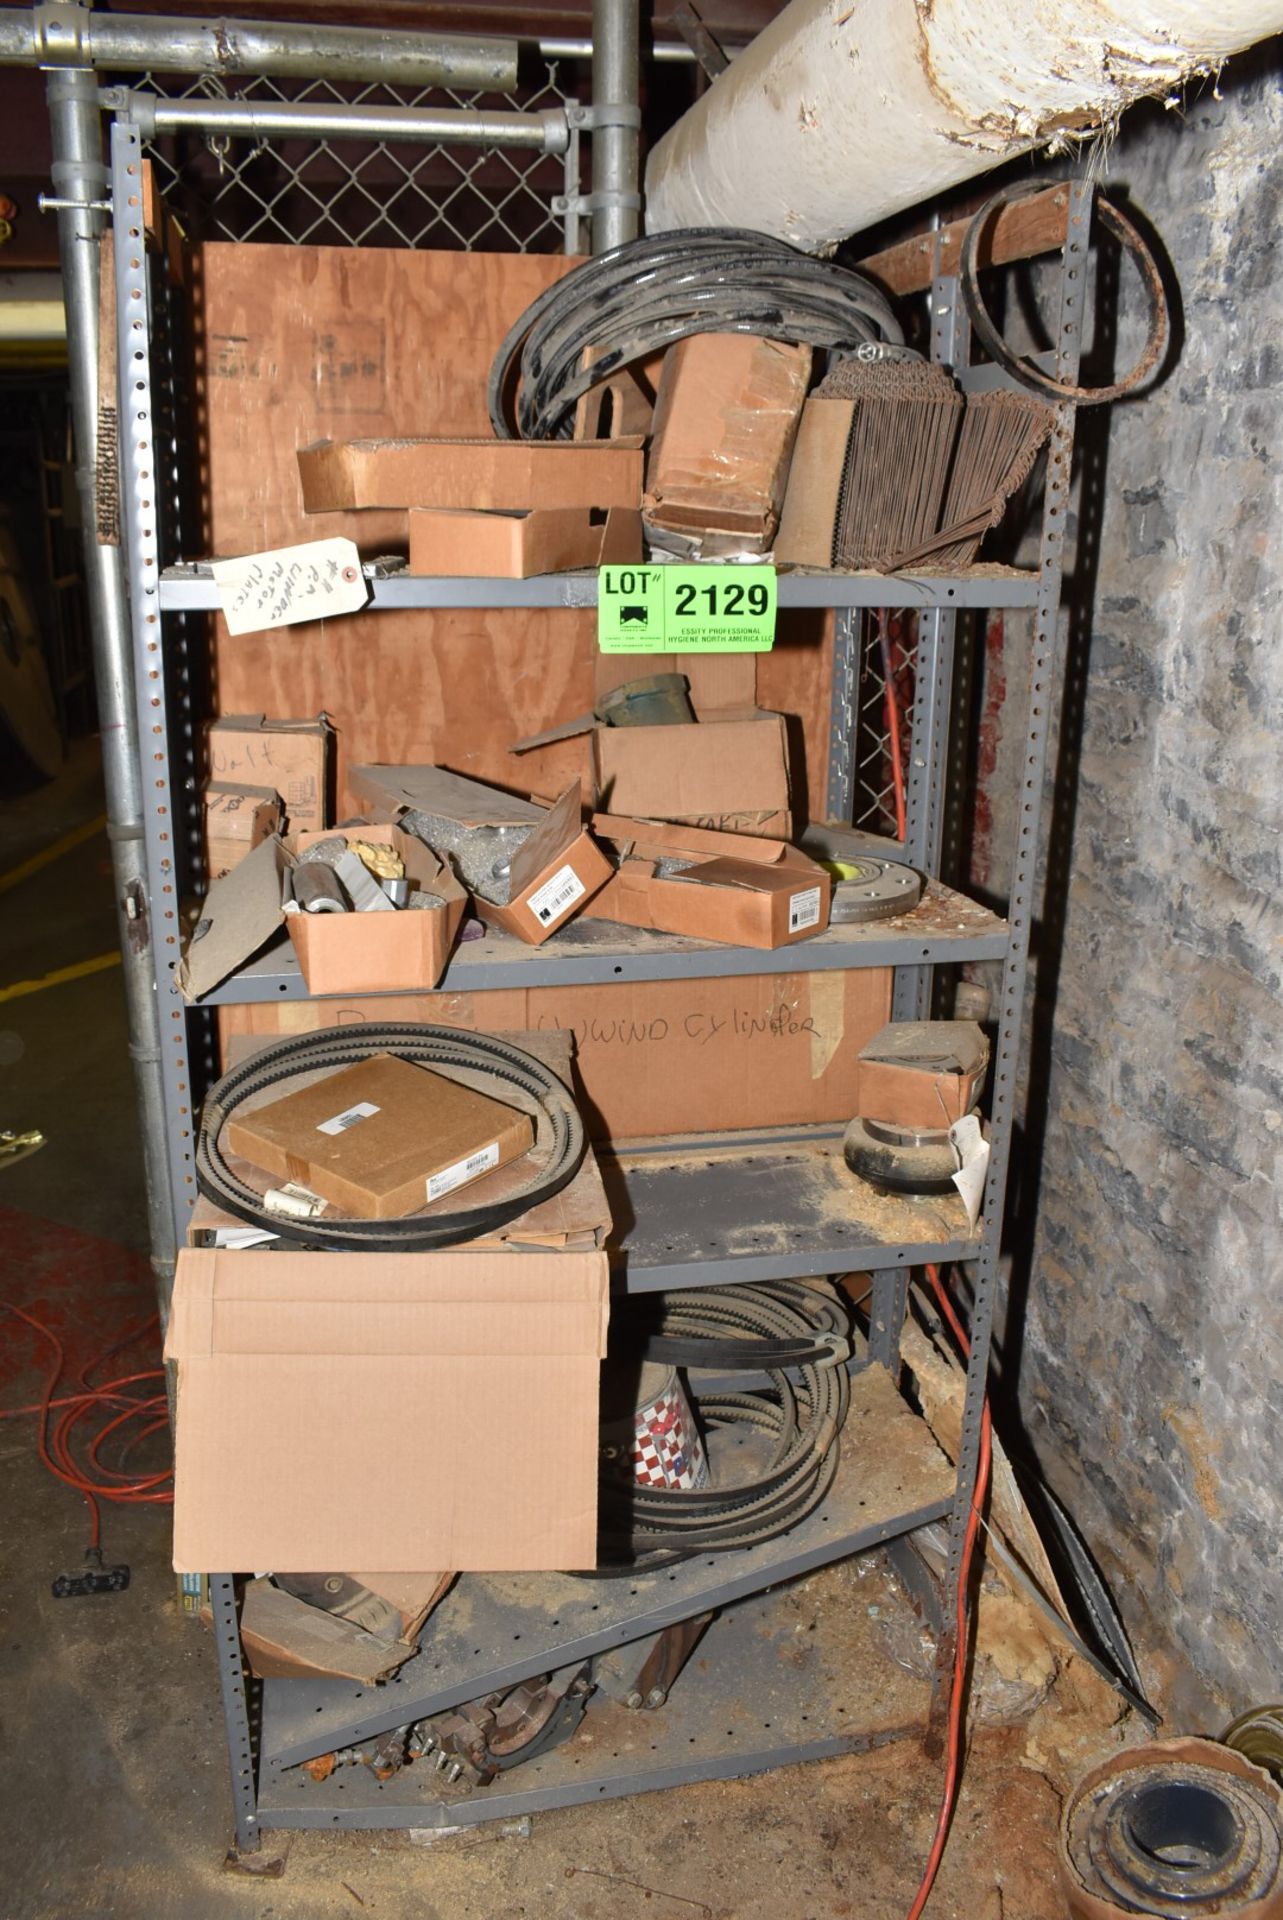 LOT/ SHELF WITH CONTENTS CONSISTING OF PARTS [RIGGING FEES FOR LOT #2129 - $TBD USD PLUS